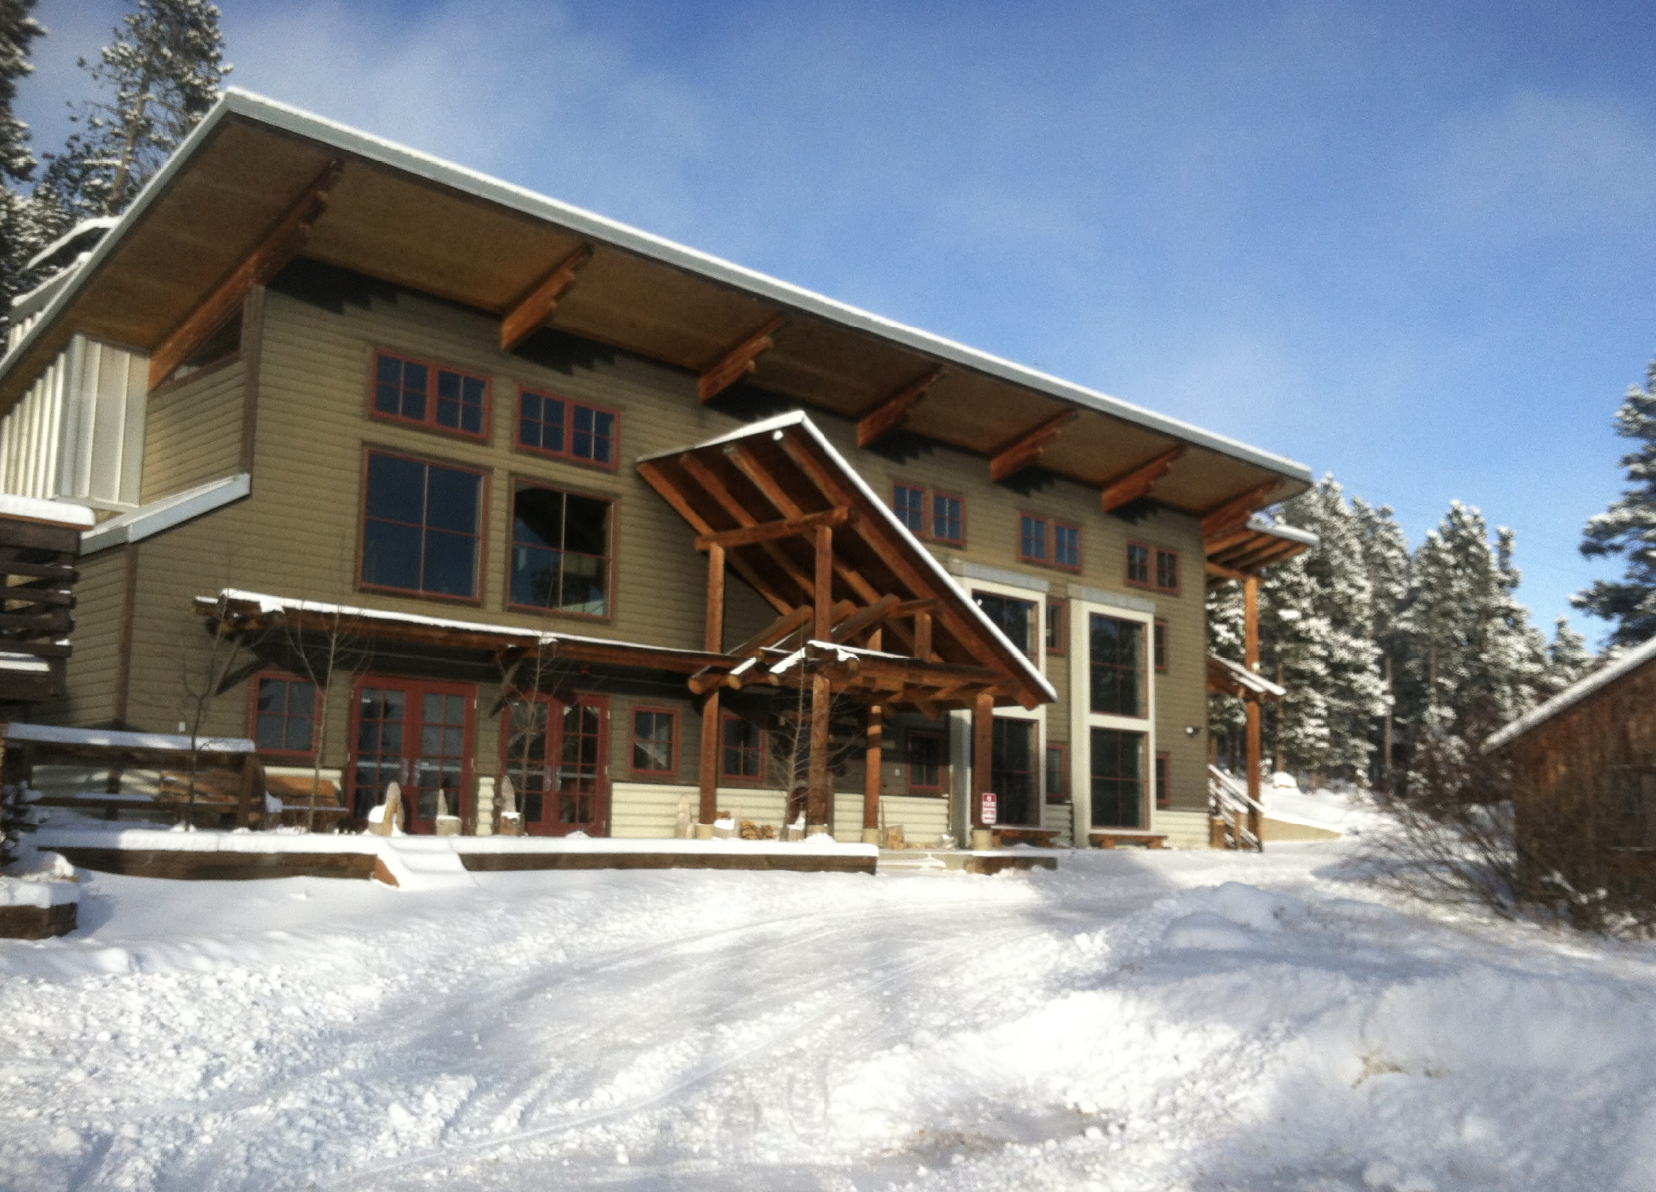 Moore's Mountain Lodge - a large wooden building is surrounded by snow, and depicts the lodging for the workshop